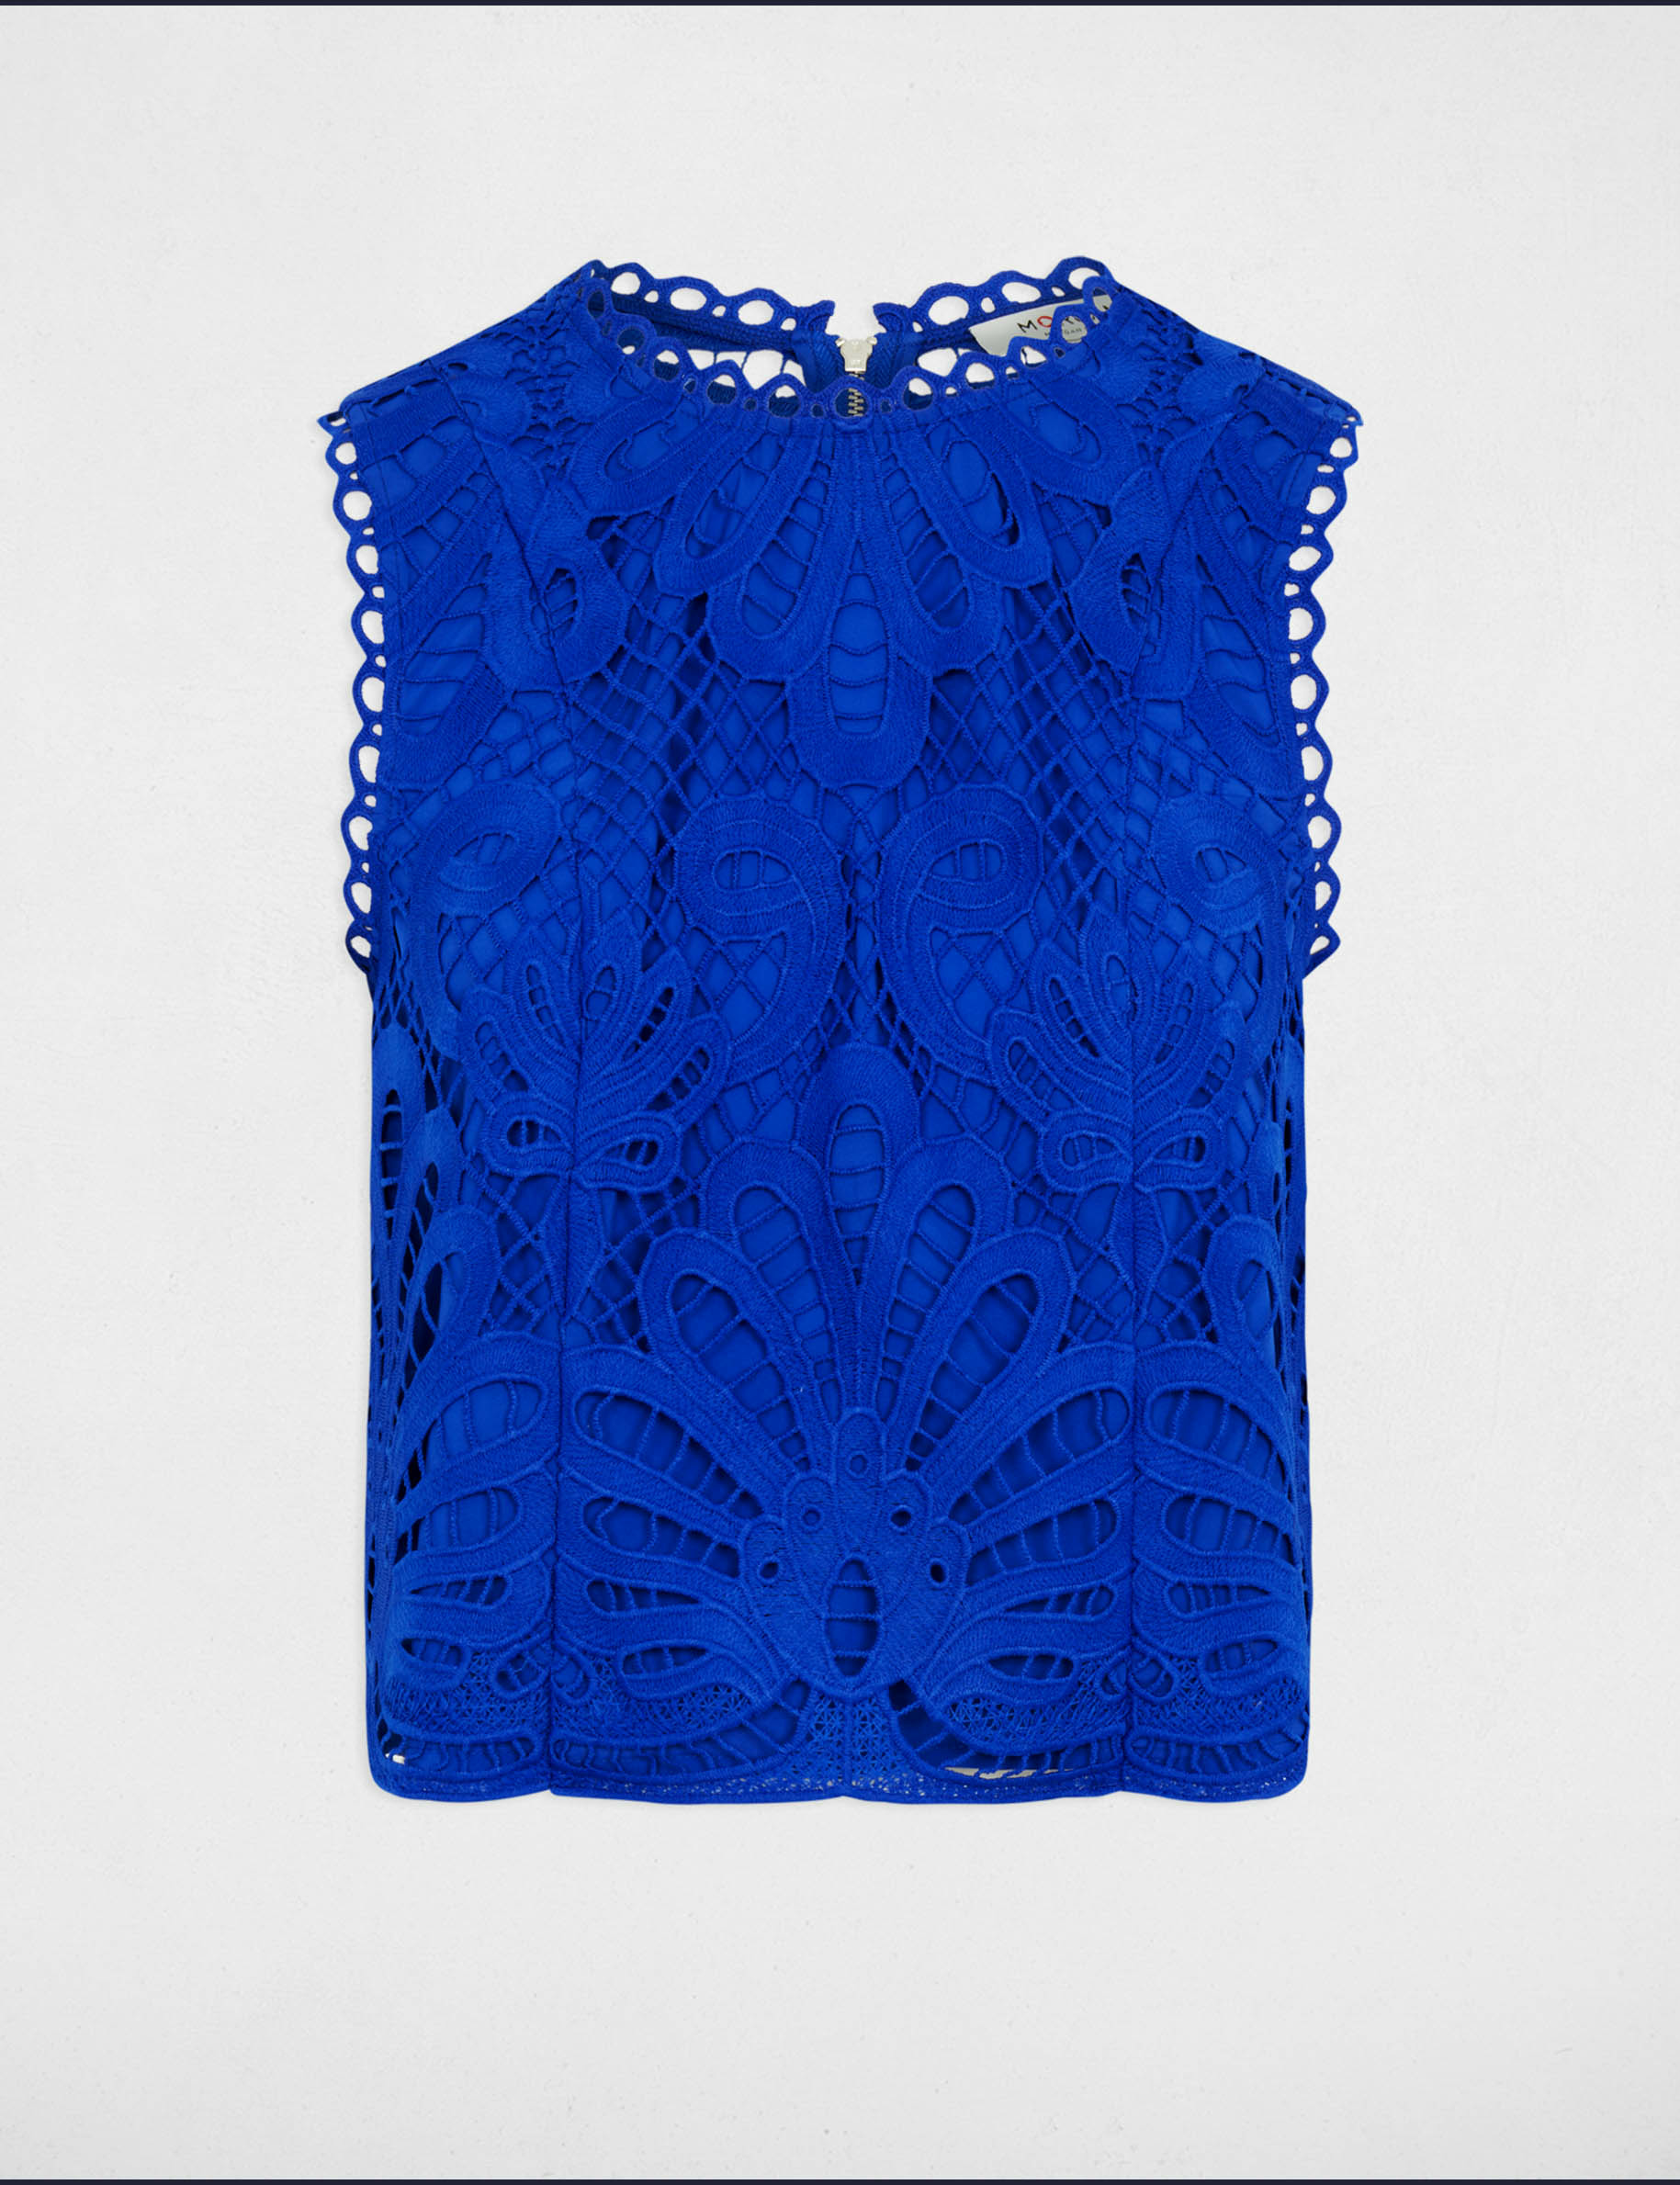 Sleeveless lace top electric blue ladies'